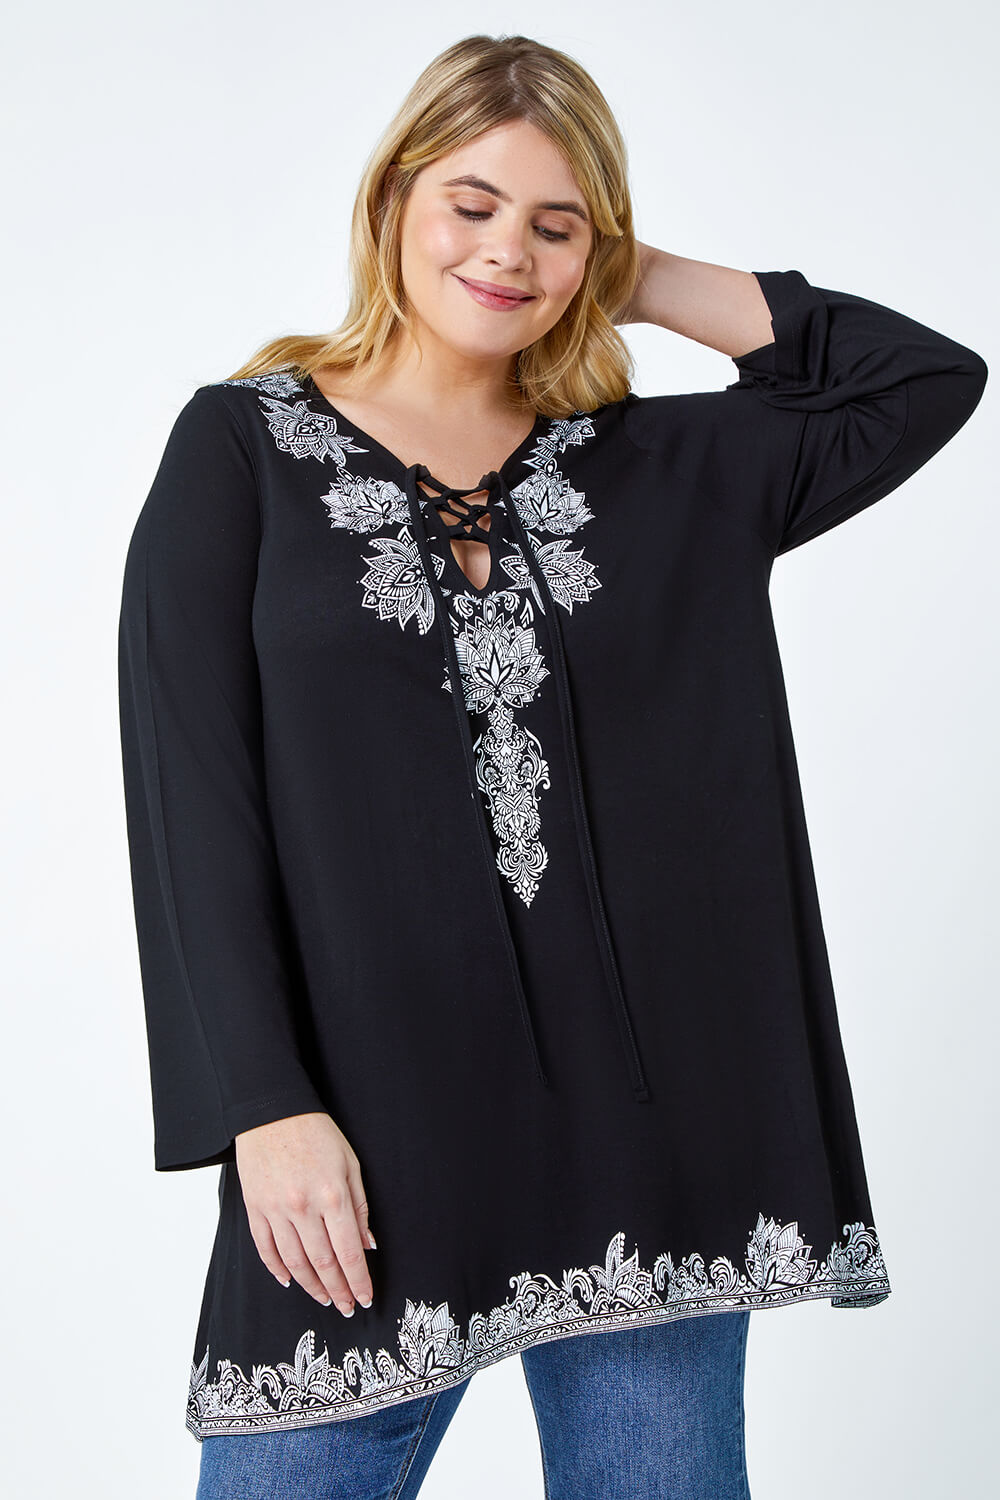 Black Curve Border Print Lace Up Top, Image 4 of 5